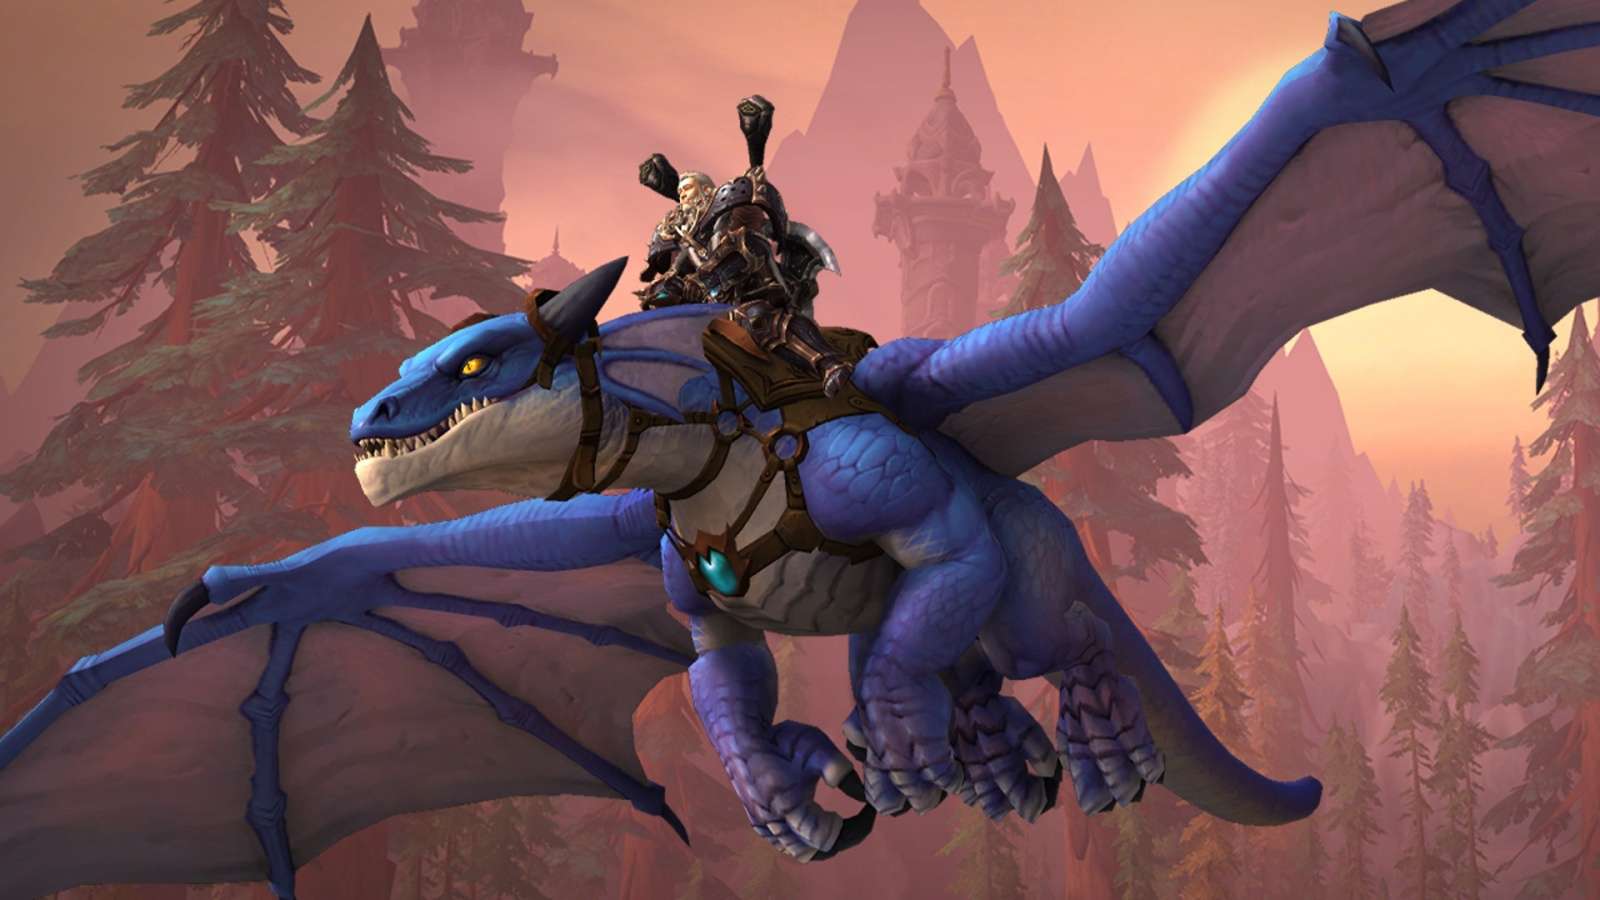 WoW dragonriding in Dragonflight